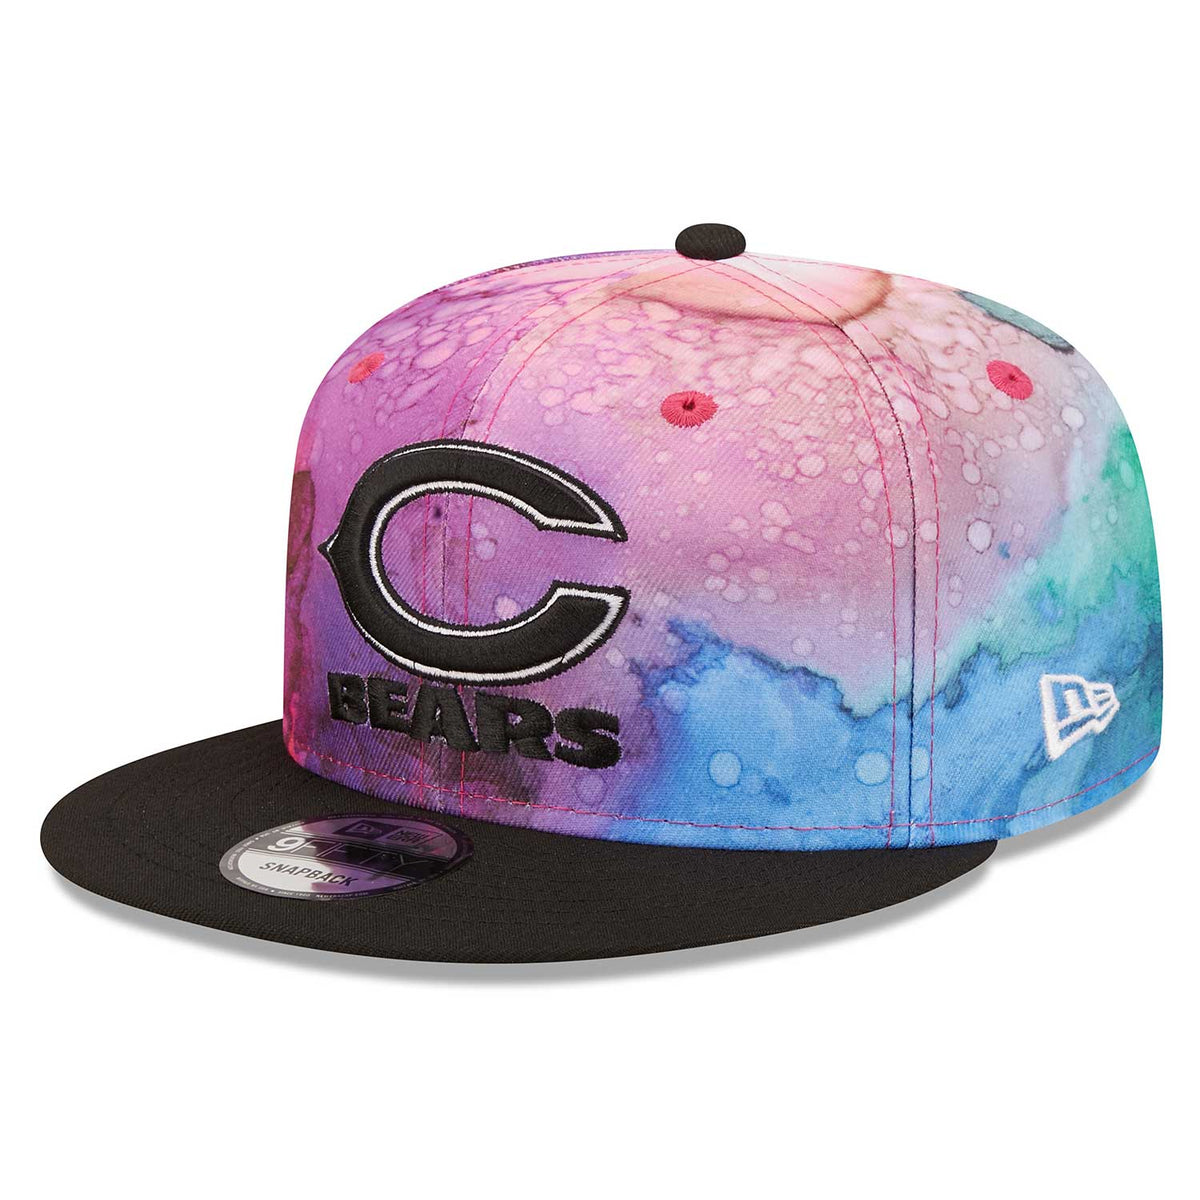 crucial catch bears hat